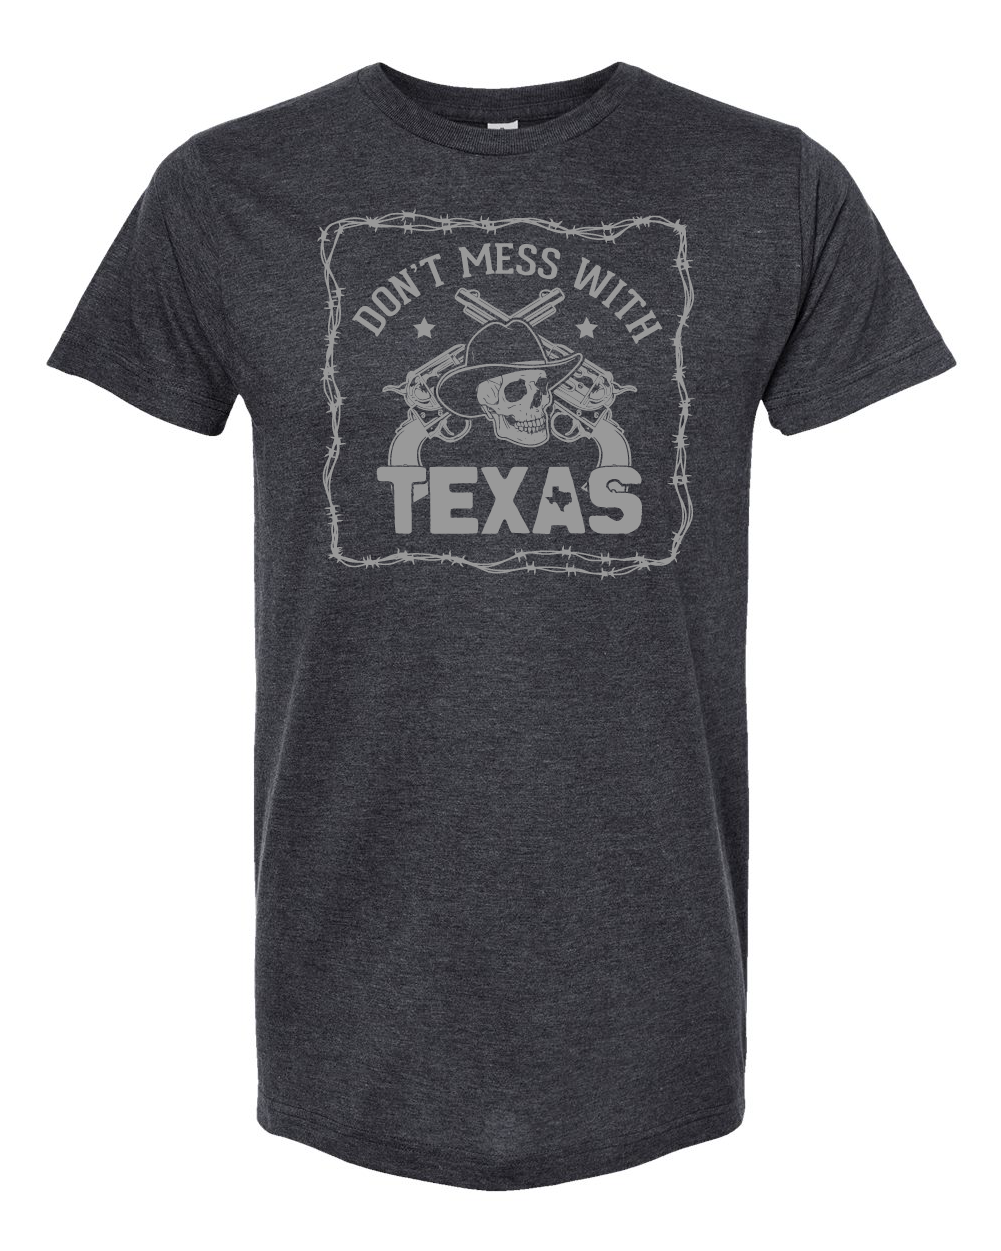 Don't Mess with Texas Tee